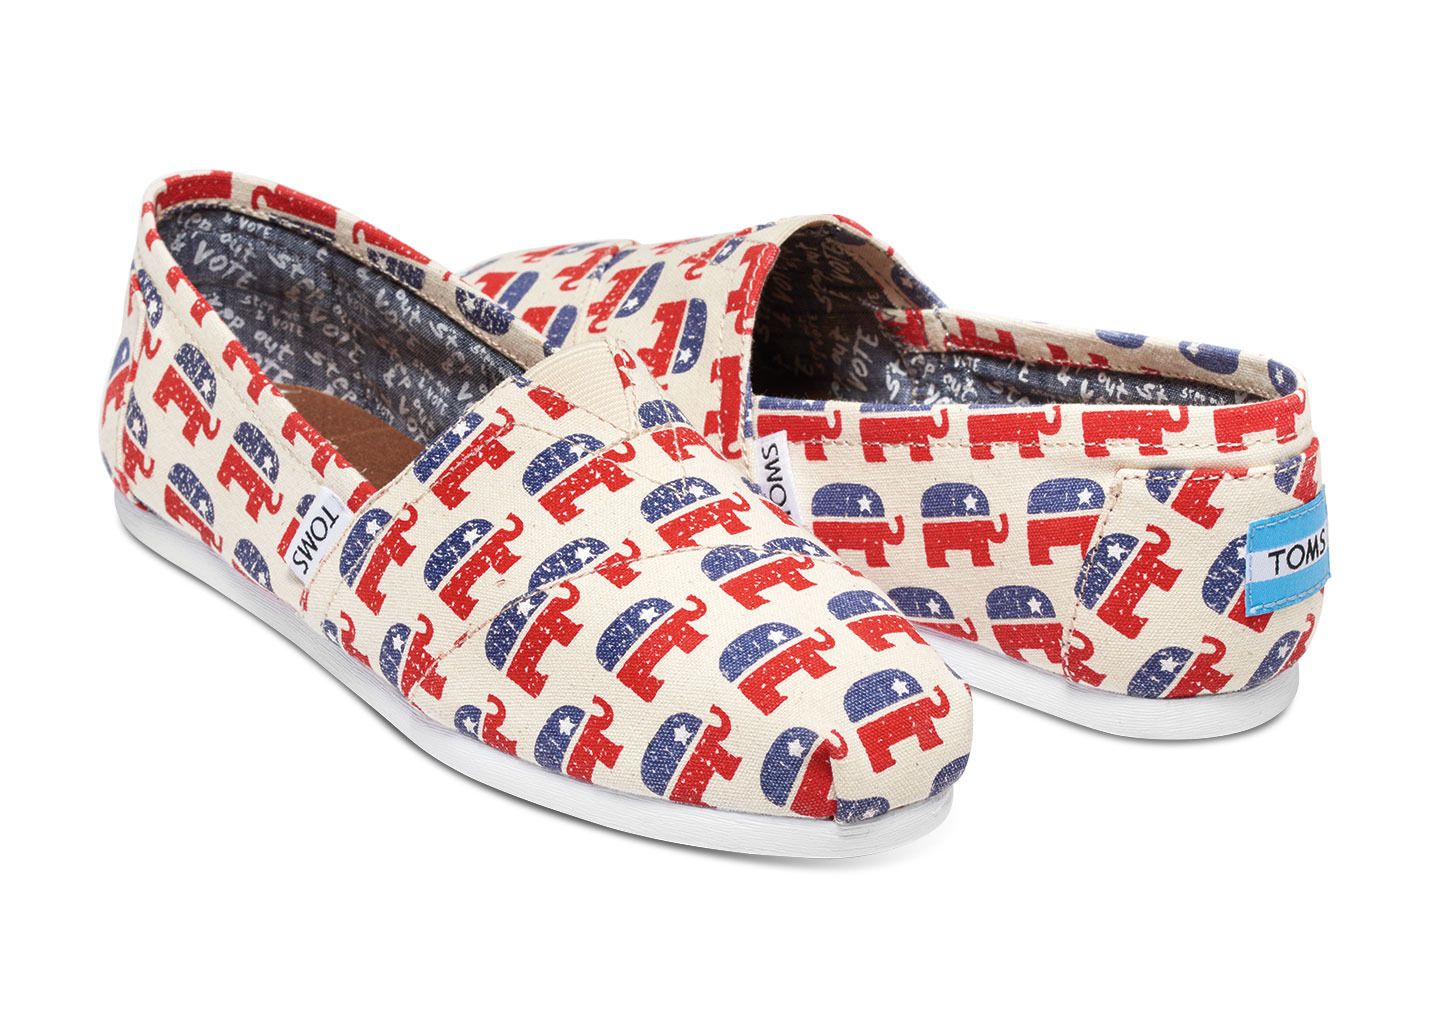 Republican elephant shoes from TOMs show your political colors while donating to a child in need. Also available with Democratic donkeys.